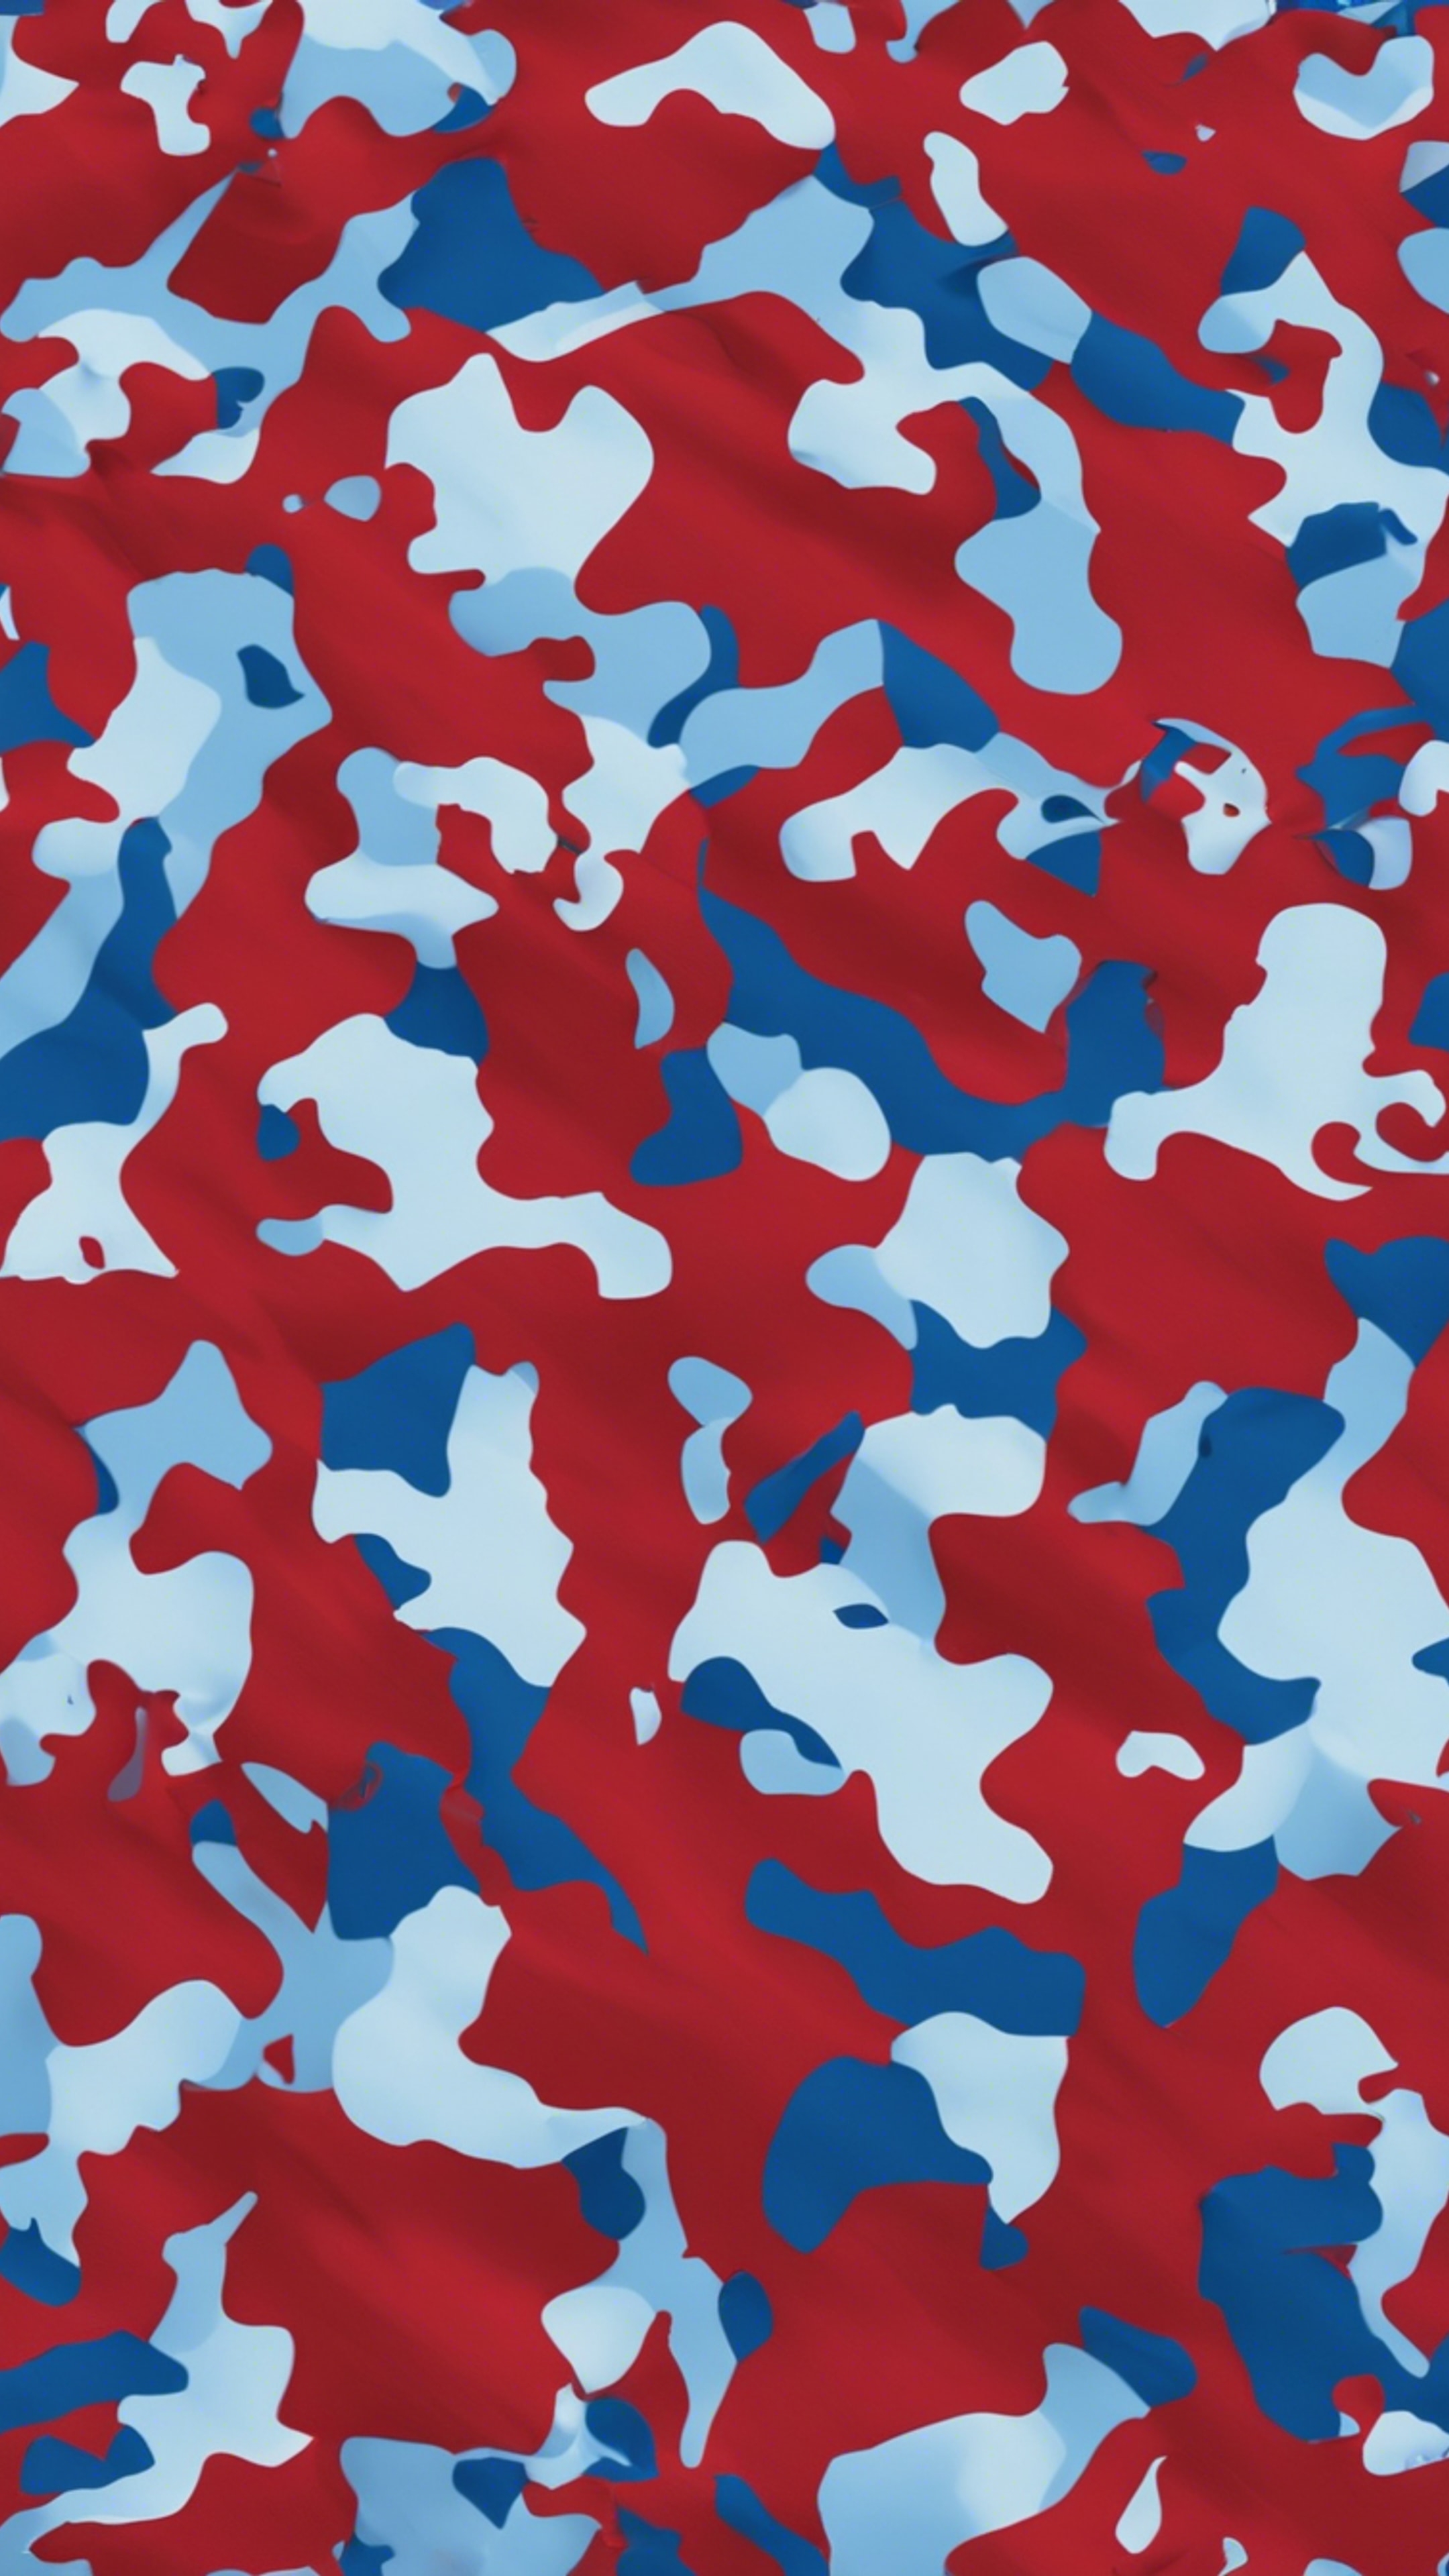 A seamles pattern of red and blue camouflage.壁紙[edd7b72010f24e93b1c5]